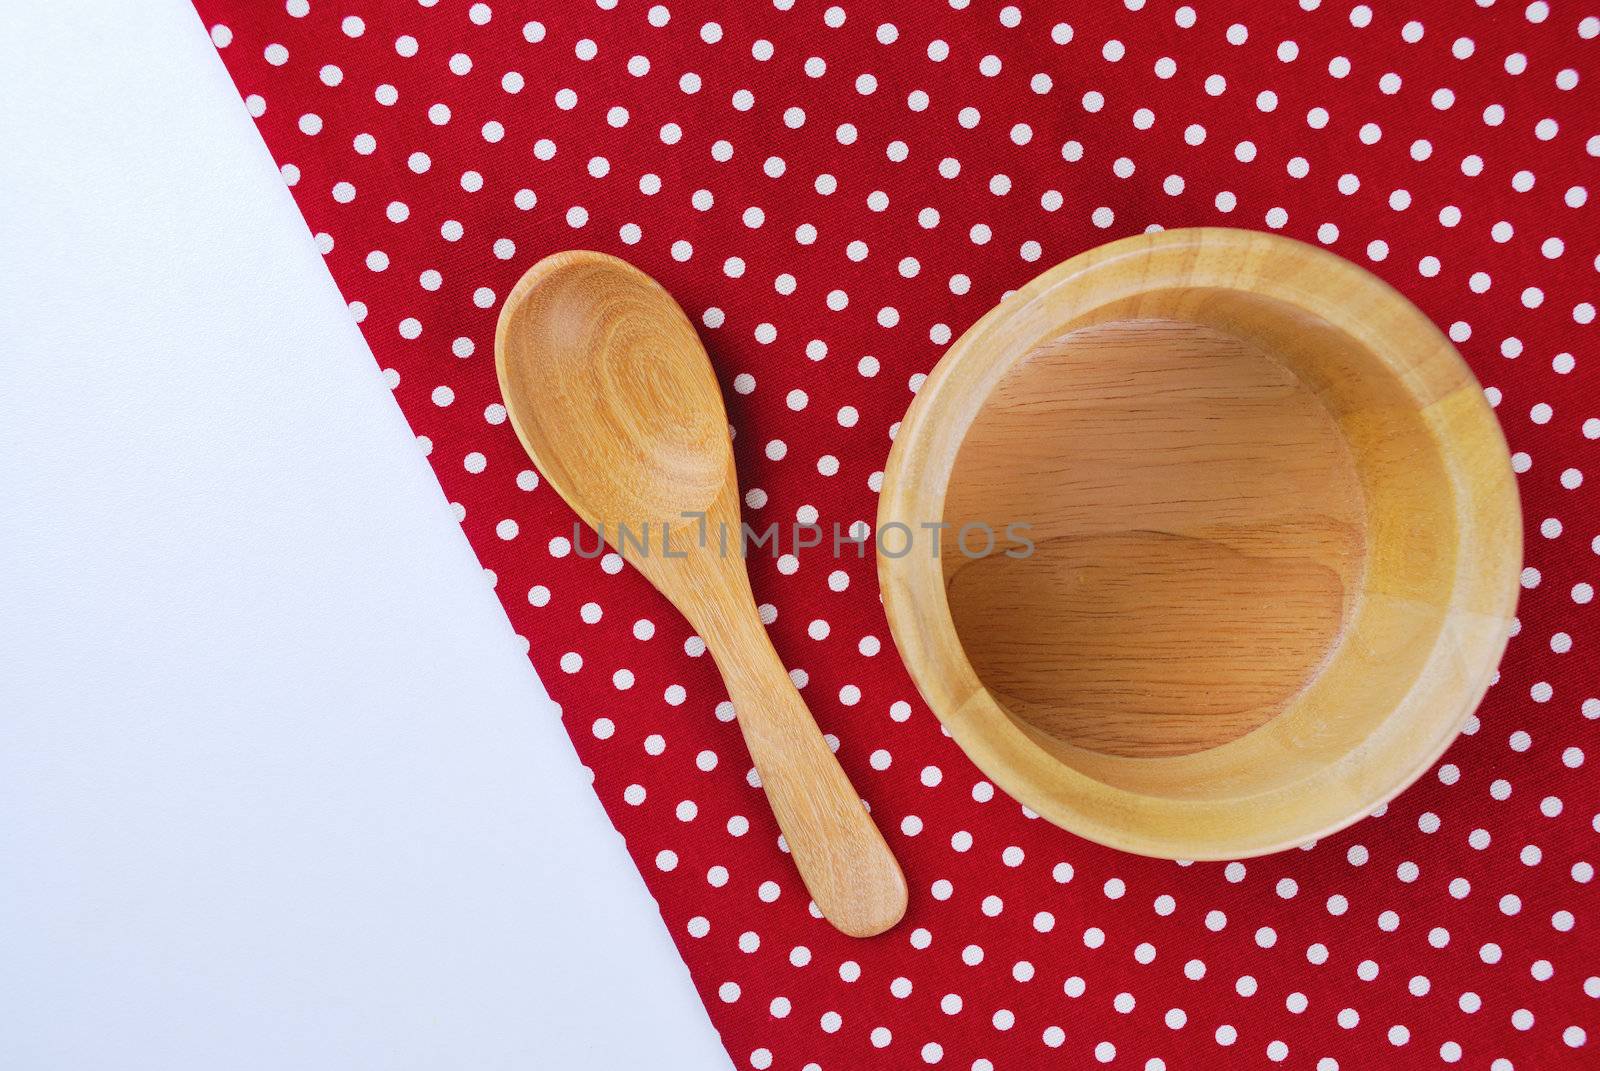 Wooden bowl, tablecloth, spoon, fork on table background